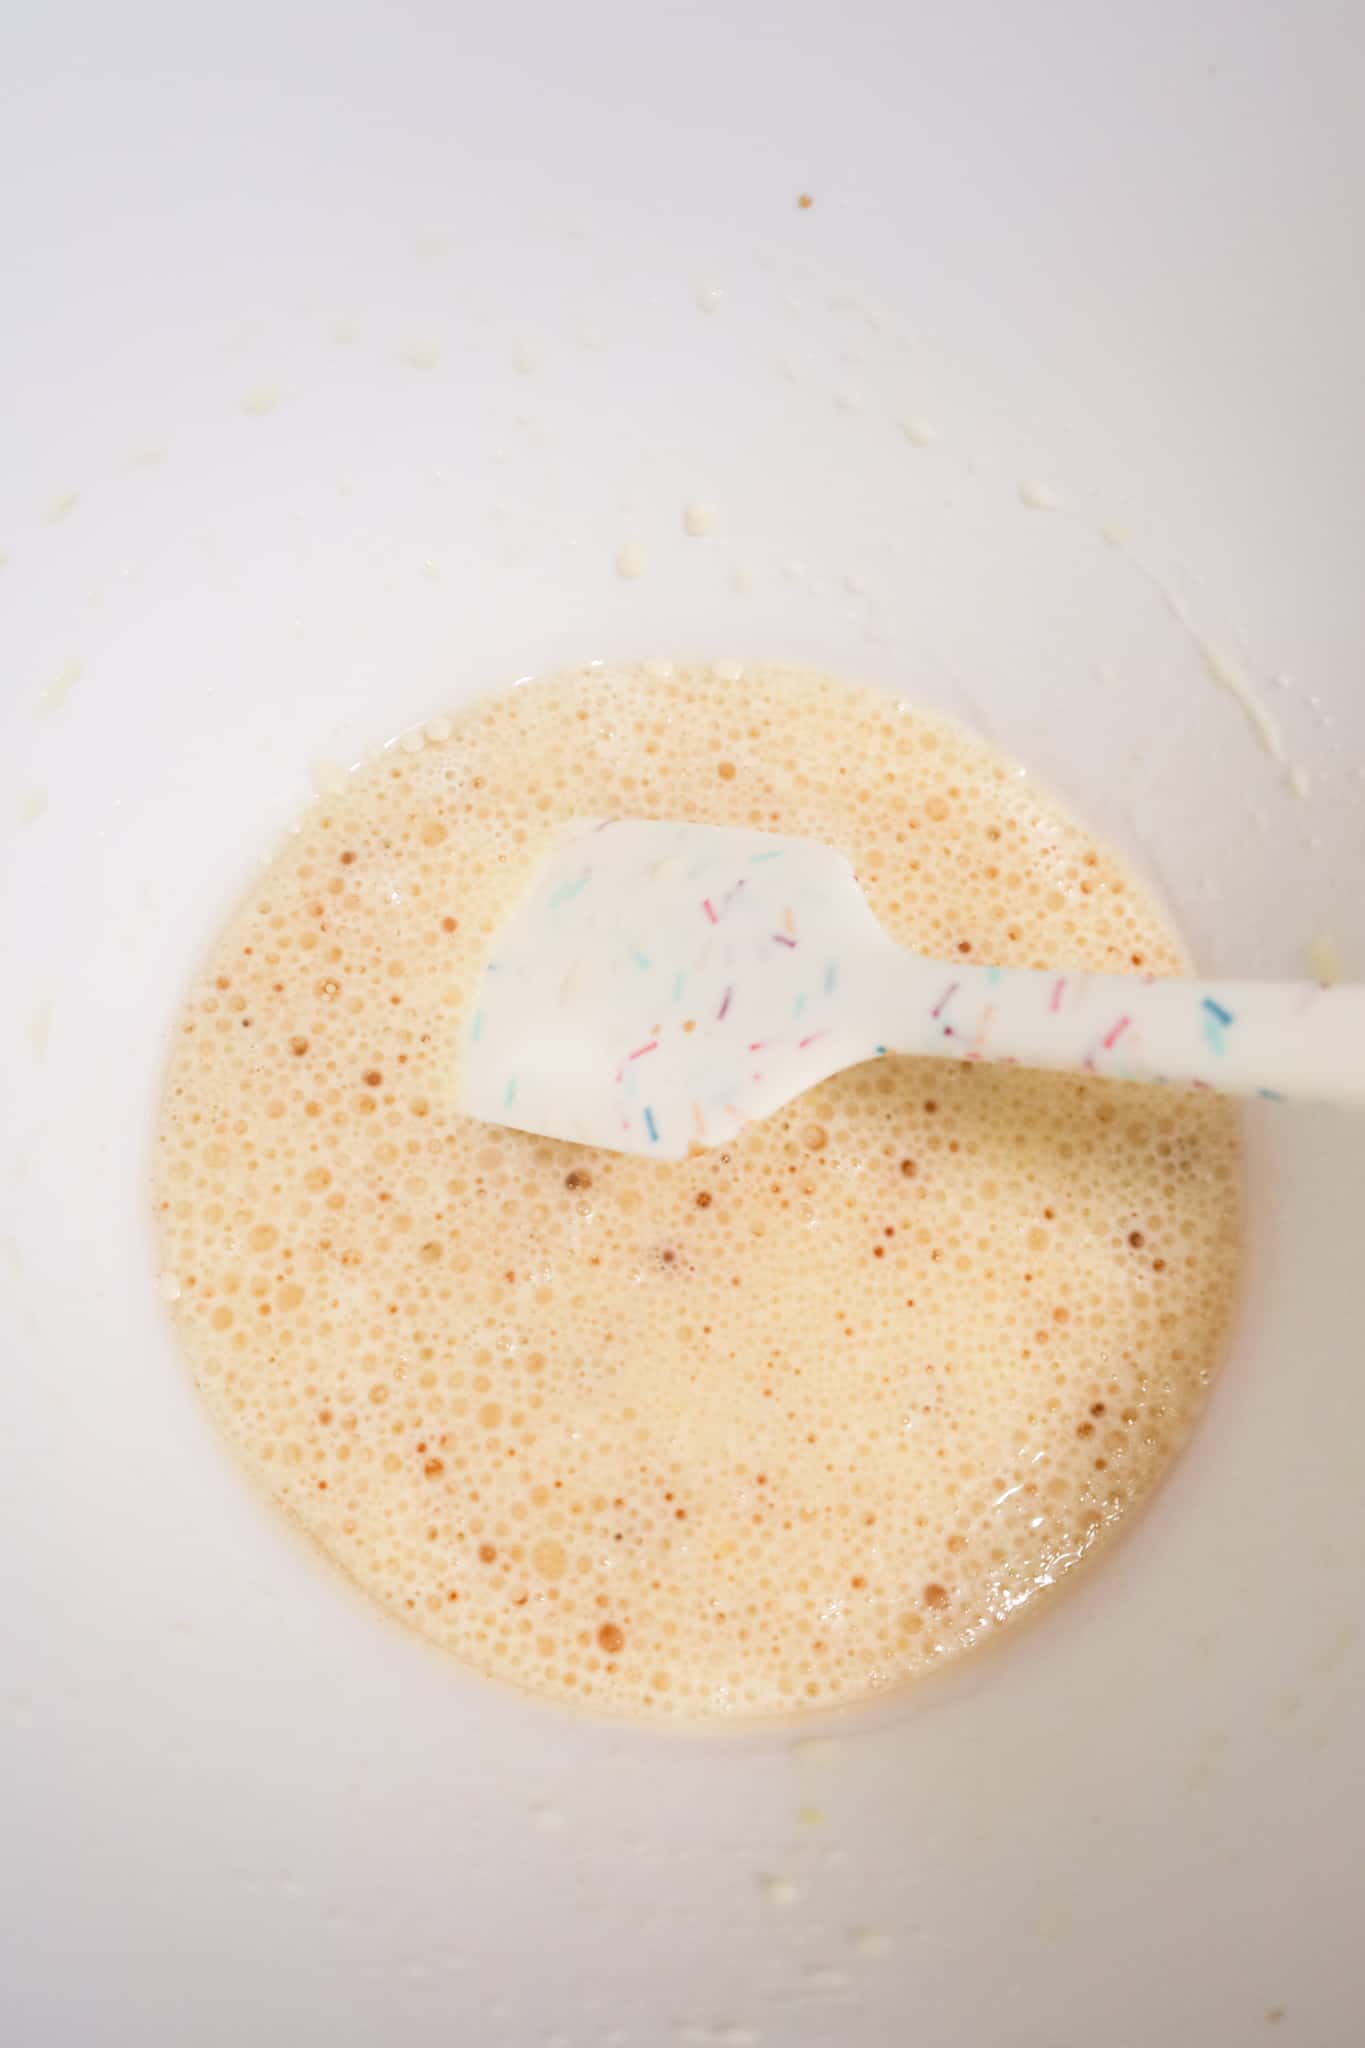 oil, vanilla, milk and egg mixture in a mixing bowl